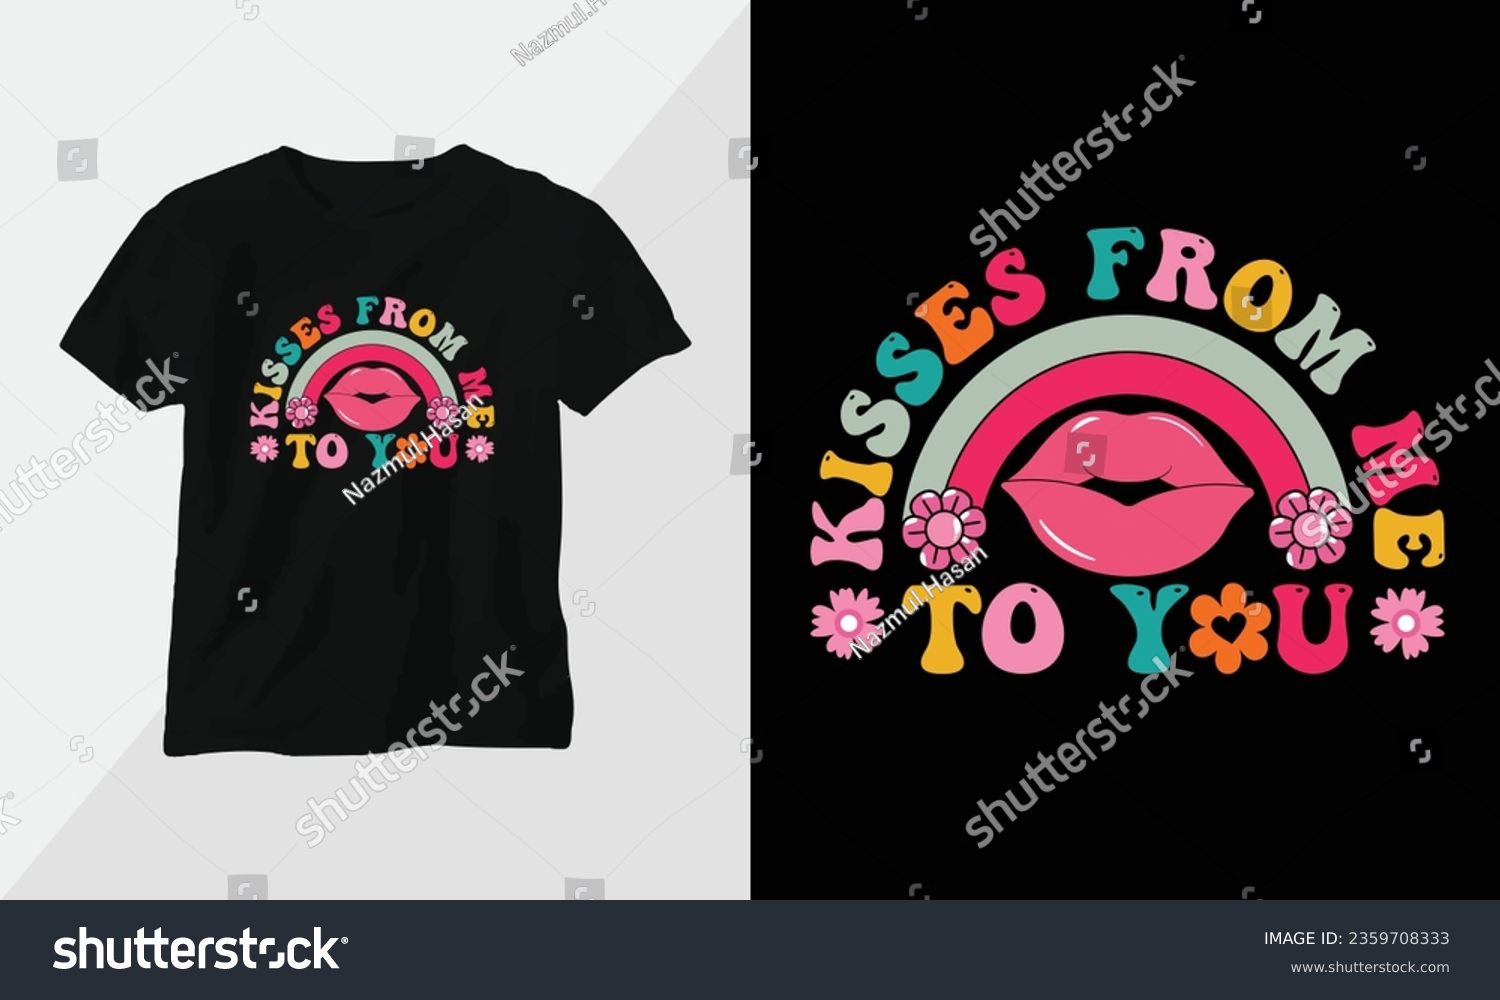 SVG of Kisses from me to you - Retro Groovy Inspirational T-shirt Design with retro style svg